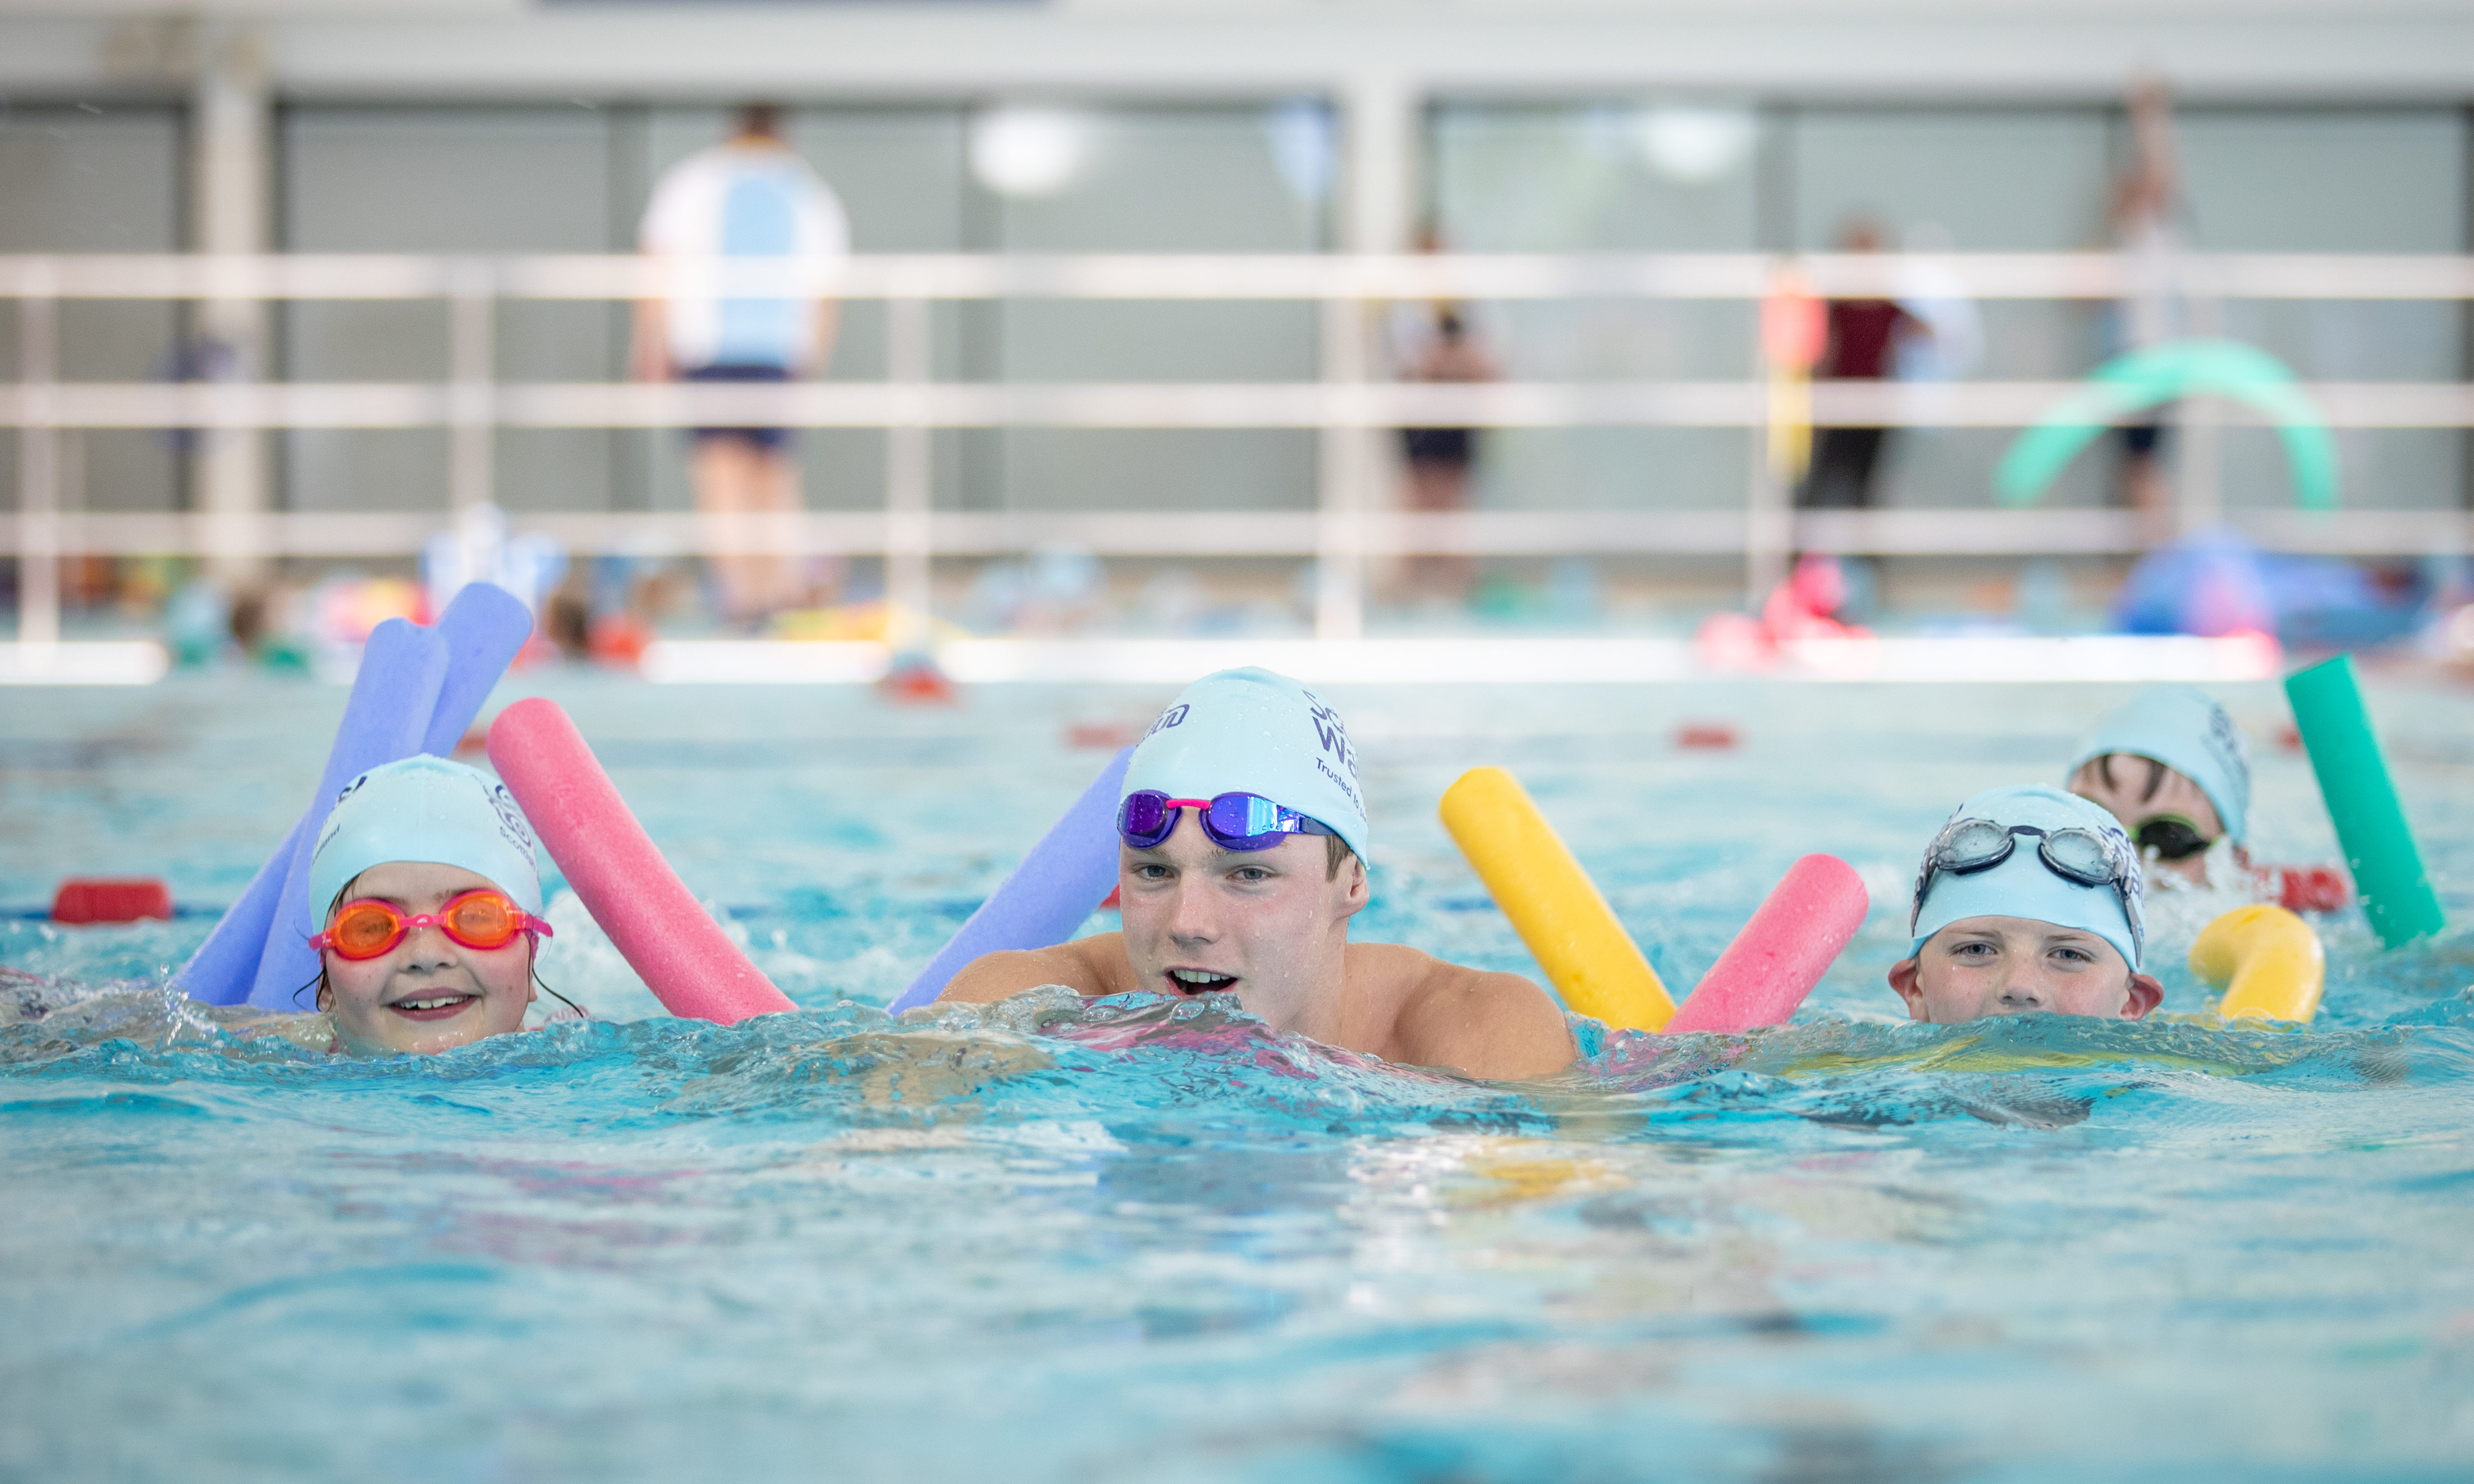 Scottish Swimming Learn to Swim ambassador Duncan Scott takes to the water with local children